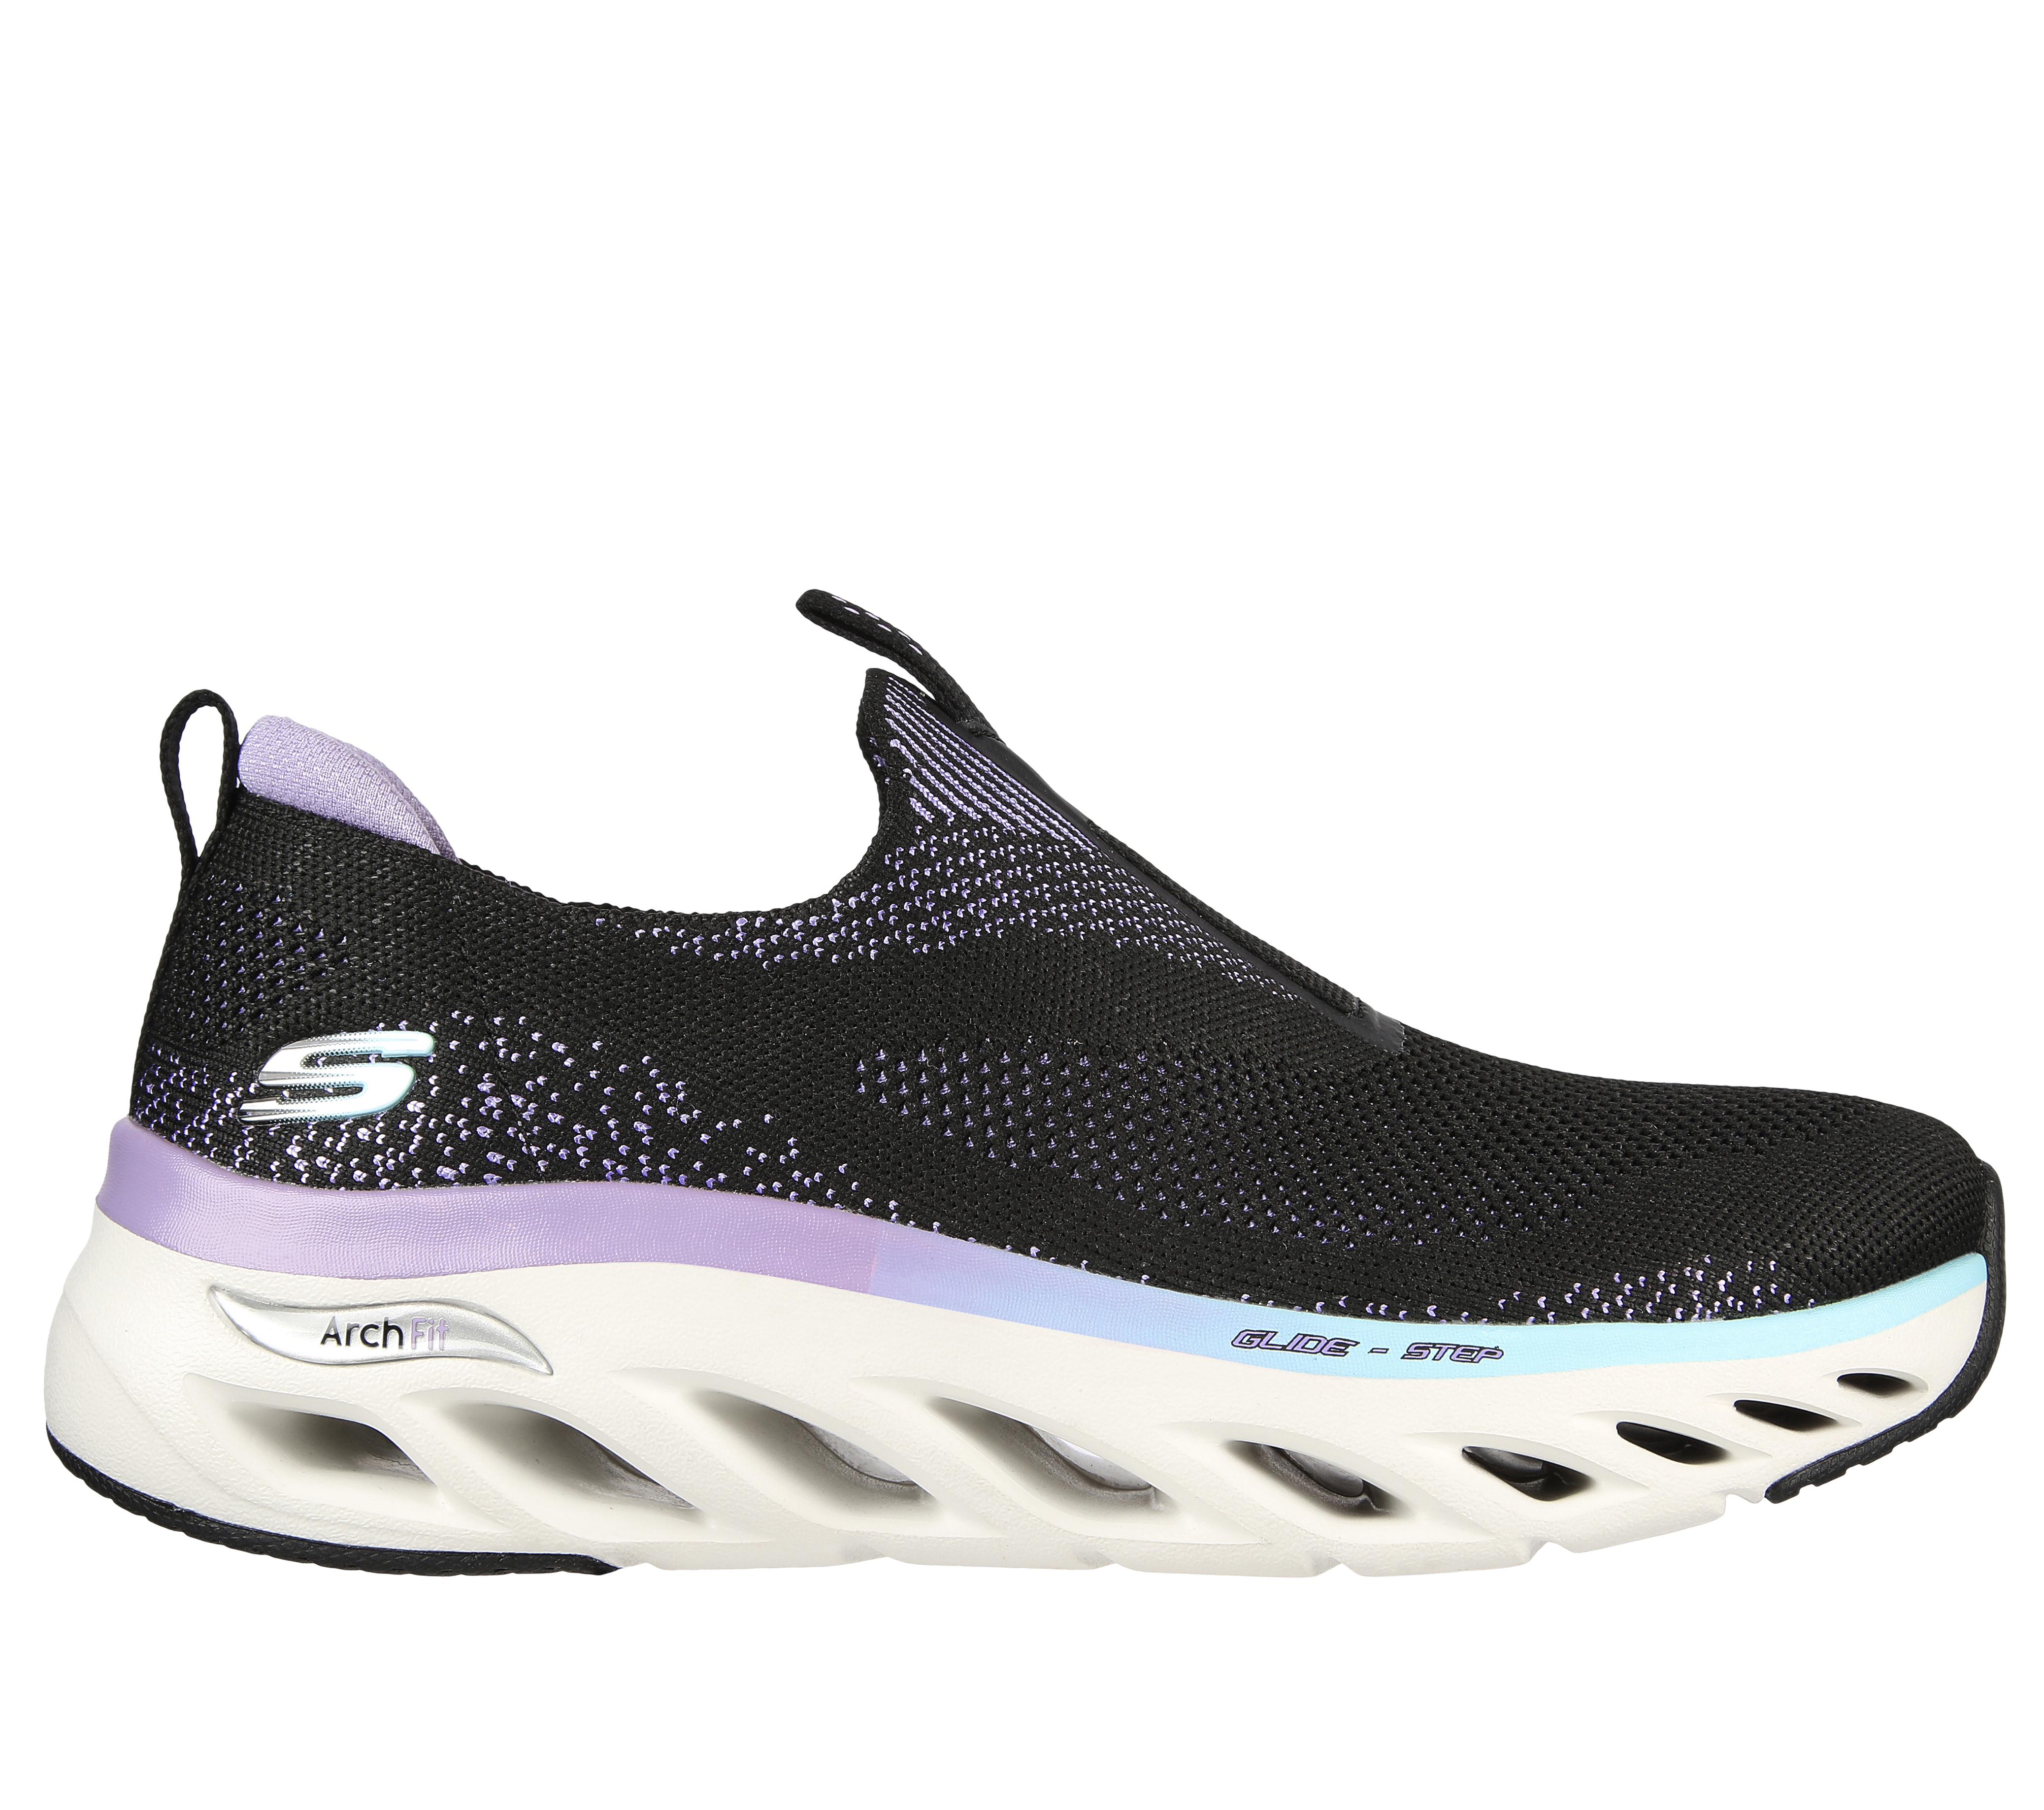 Canoa Innecesario posibilidad Skechers Arch Fit Glide-Step | SKECHERS